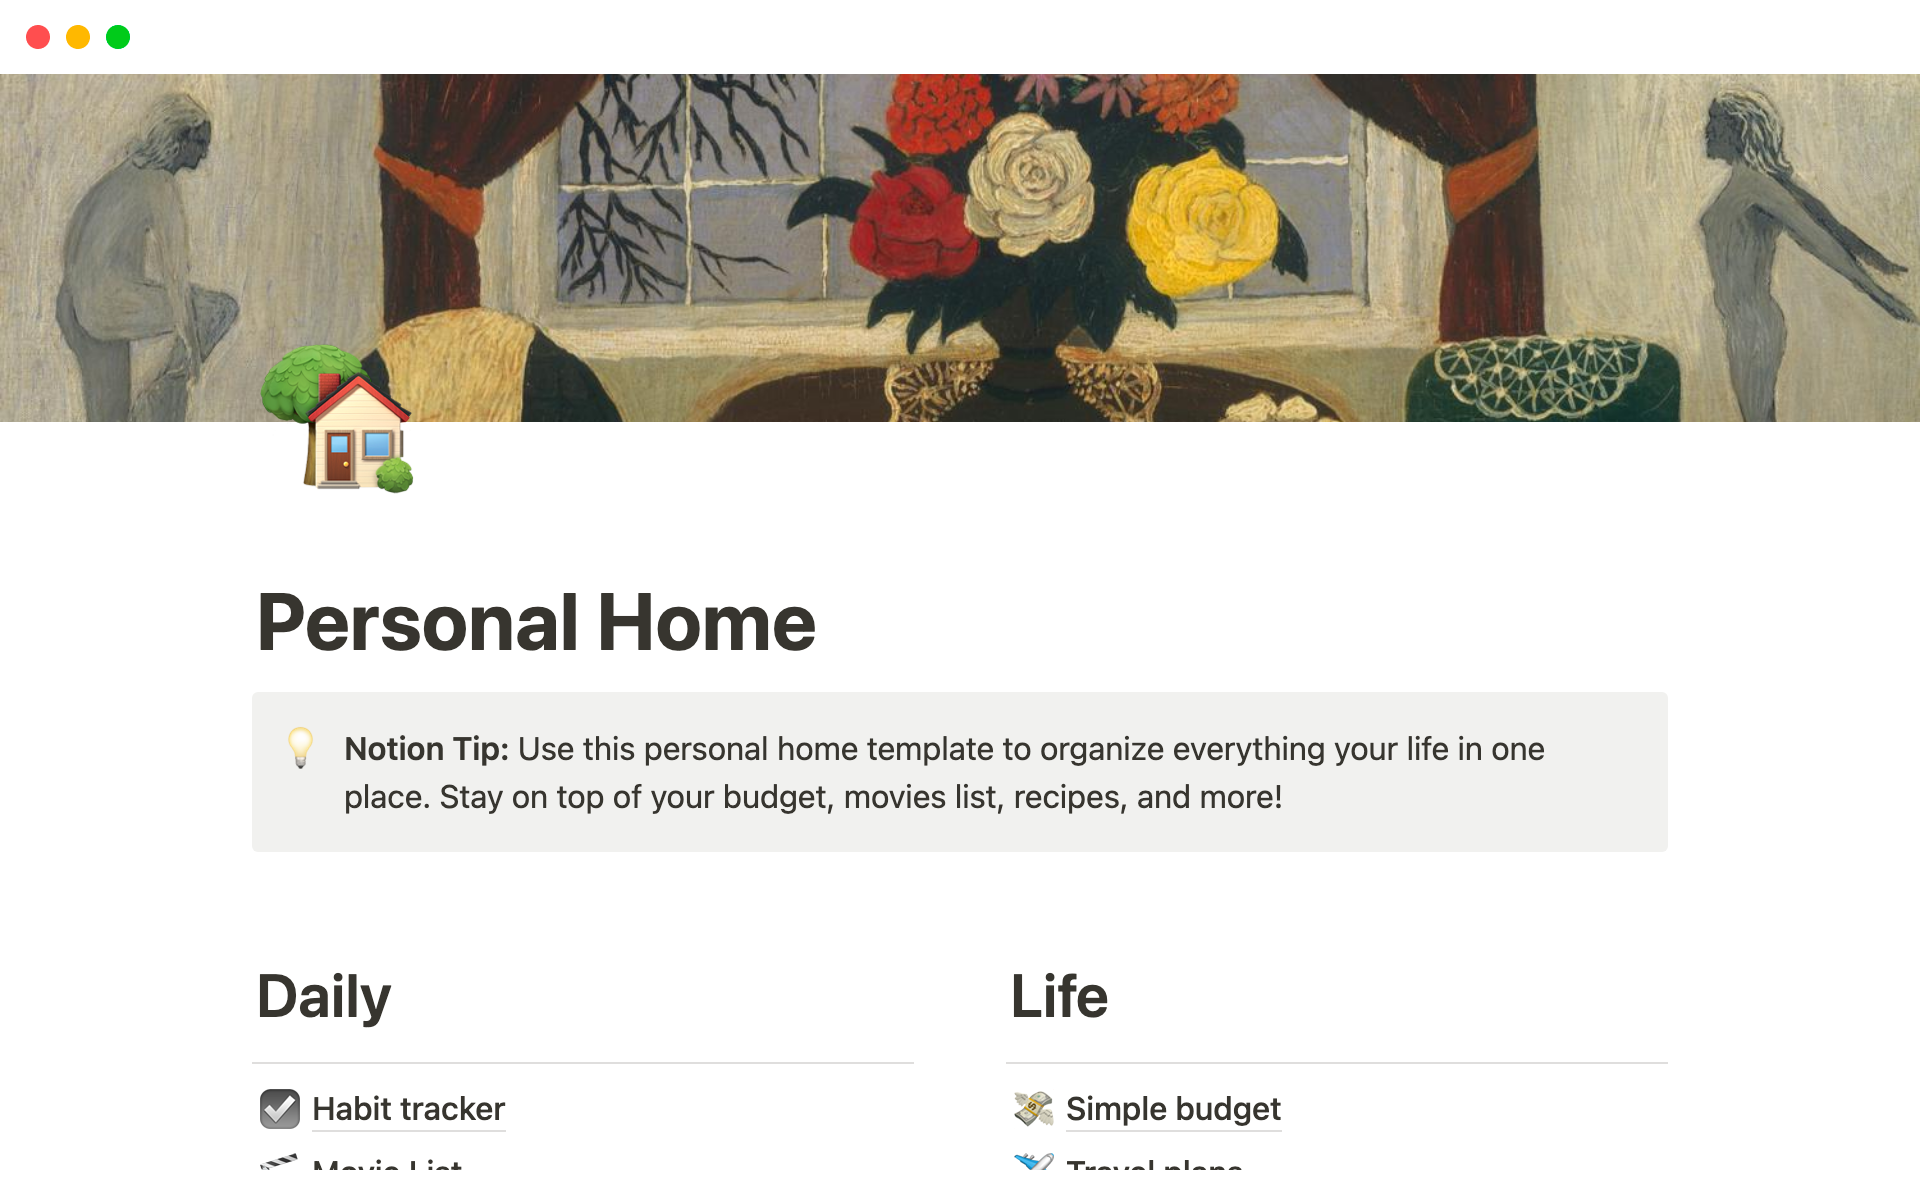 The desktop image for the Personal home template